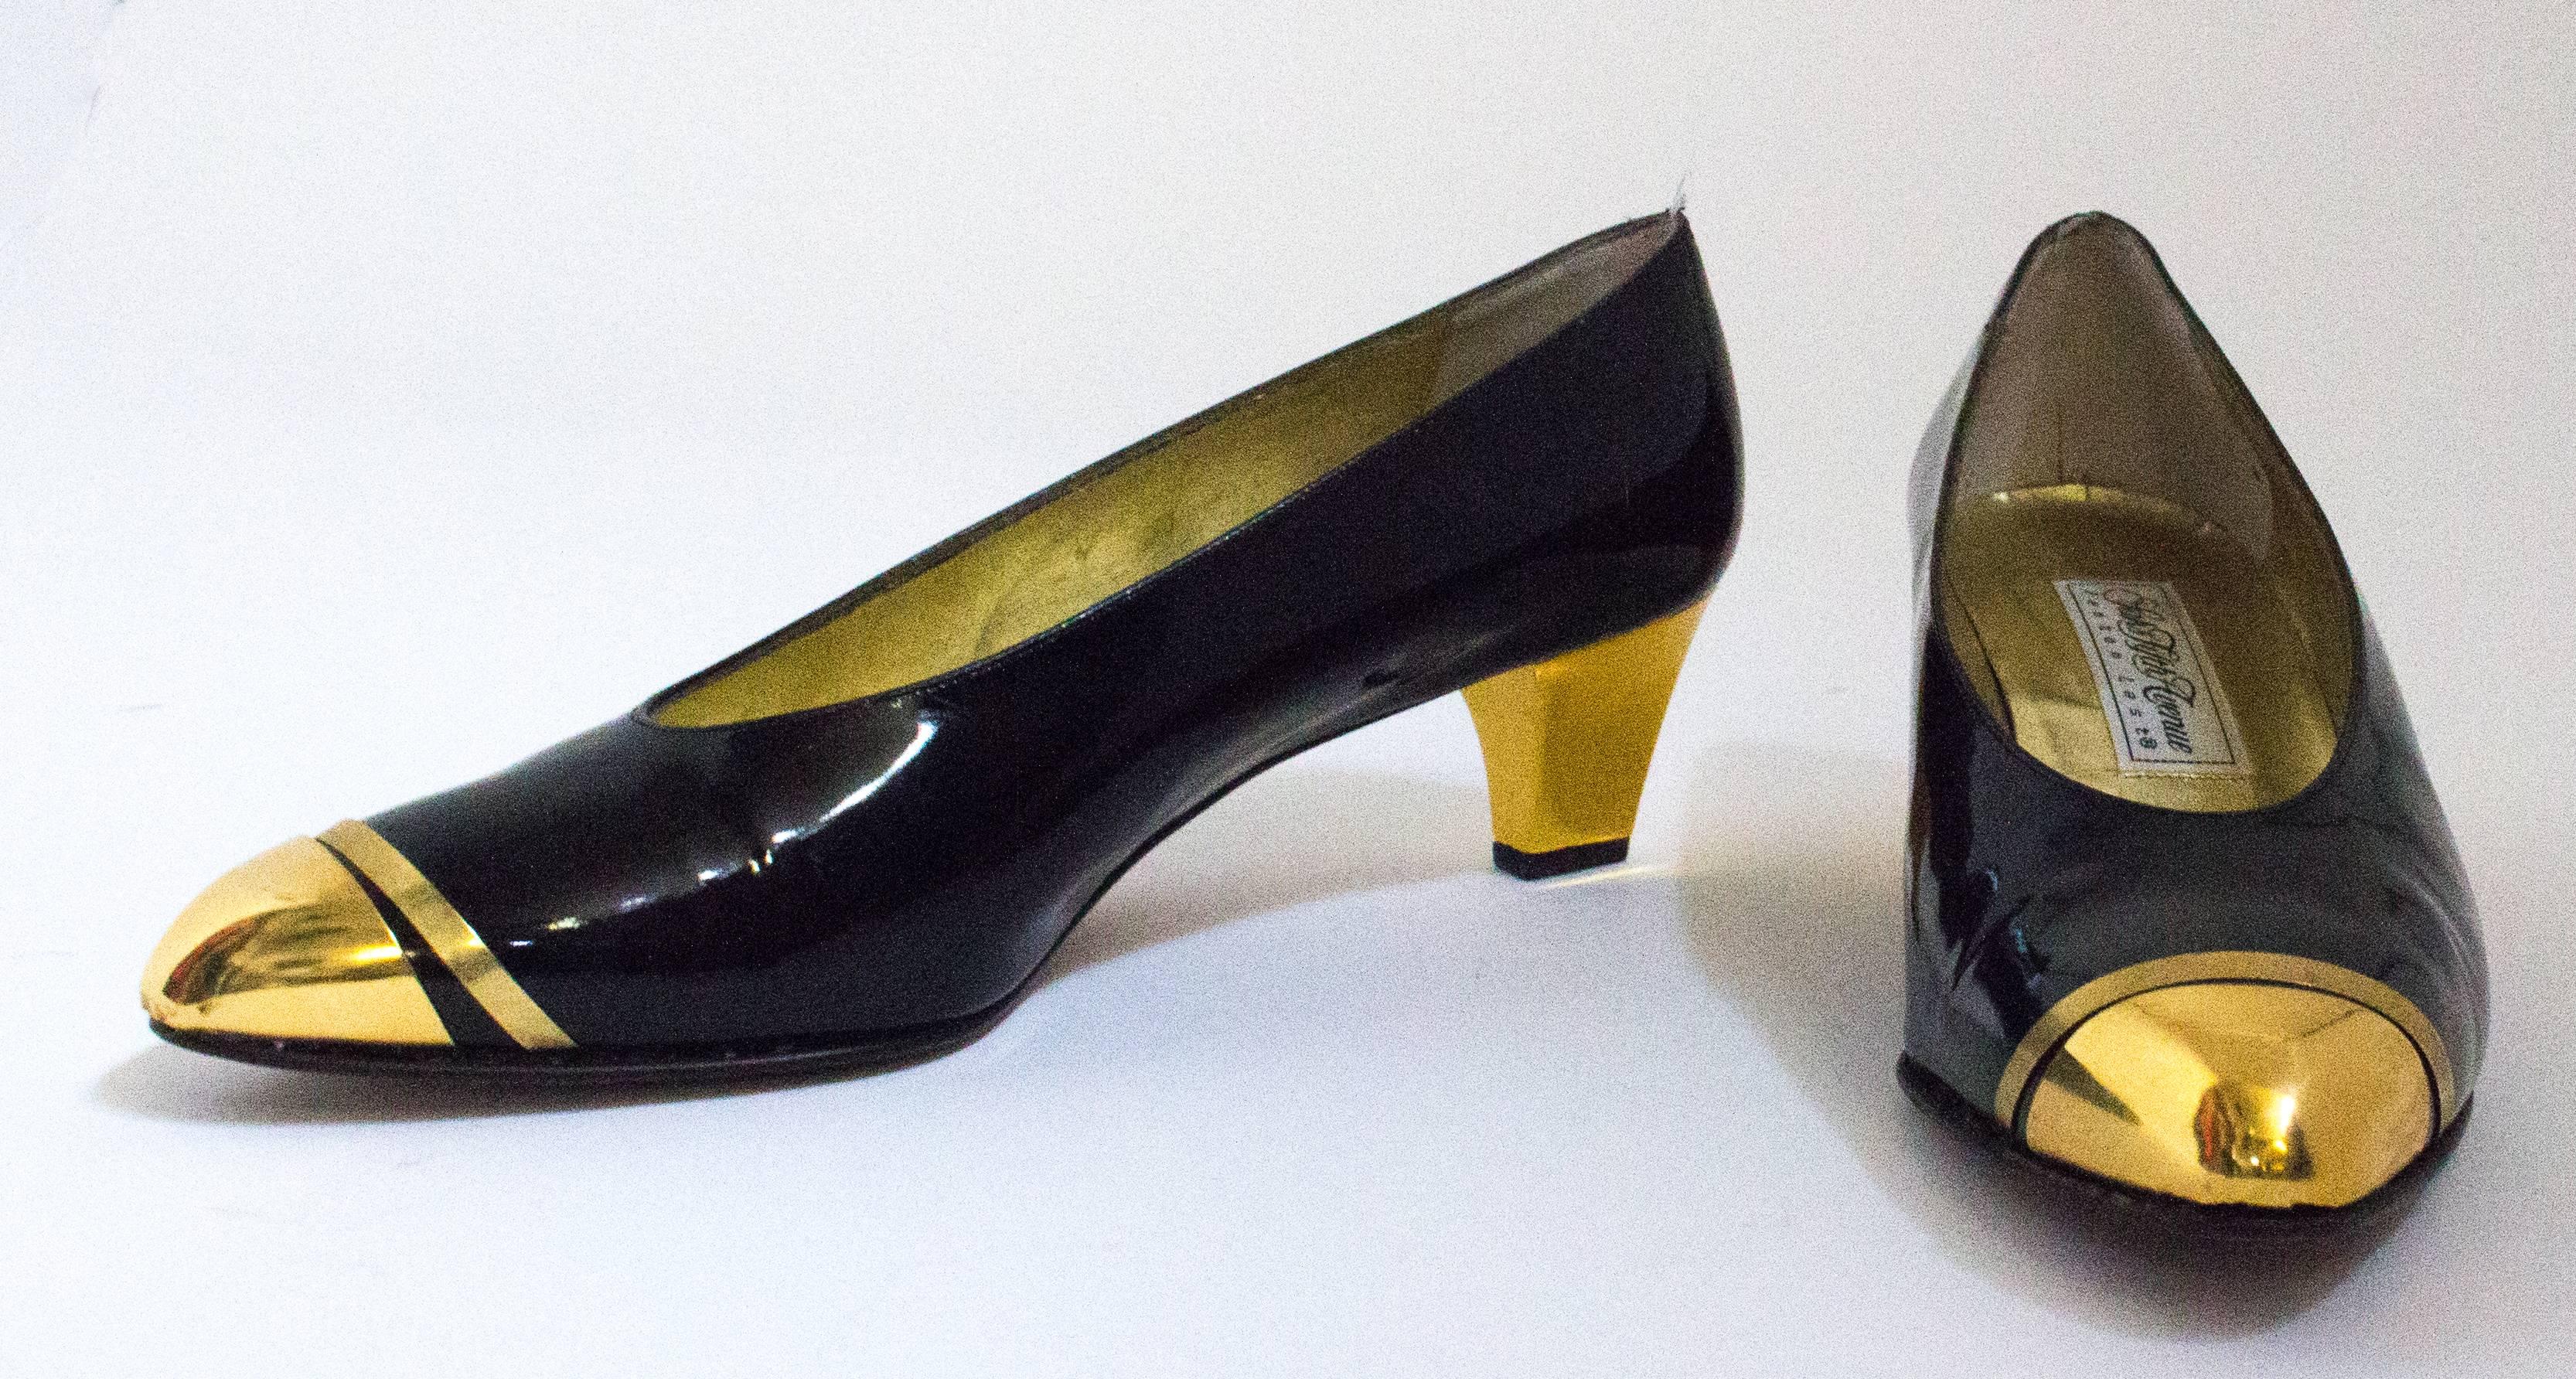 80s black patent leather pumps with gold toned metal toe cpas and heel covers. Leather soles. Made in Italy. 

Measurements:

Insole: 9 3/4 inches
Palm of the Foot: 3 inches 
Heel: 2 1/2 inches 